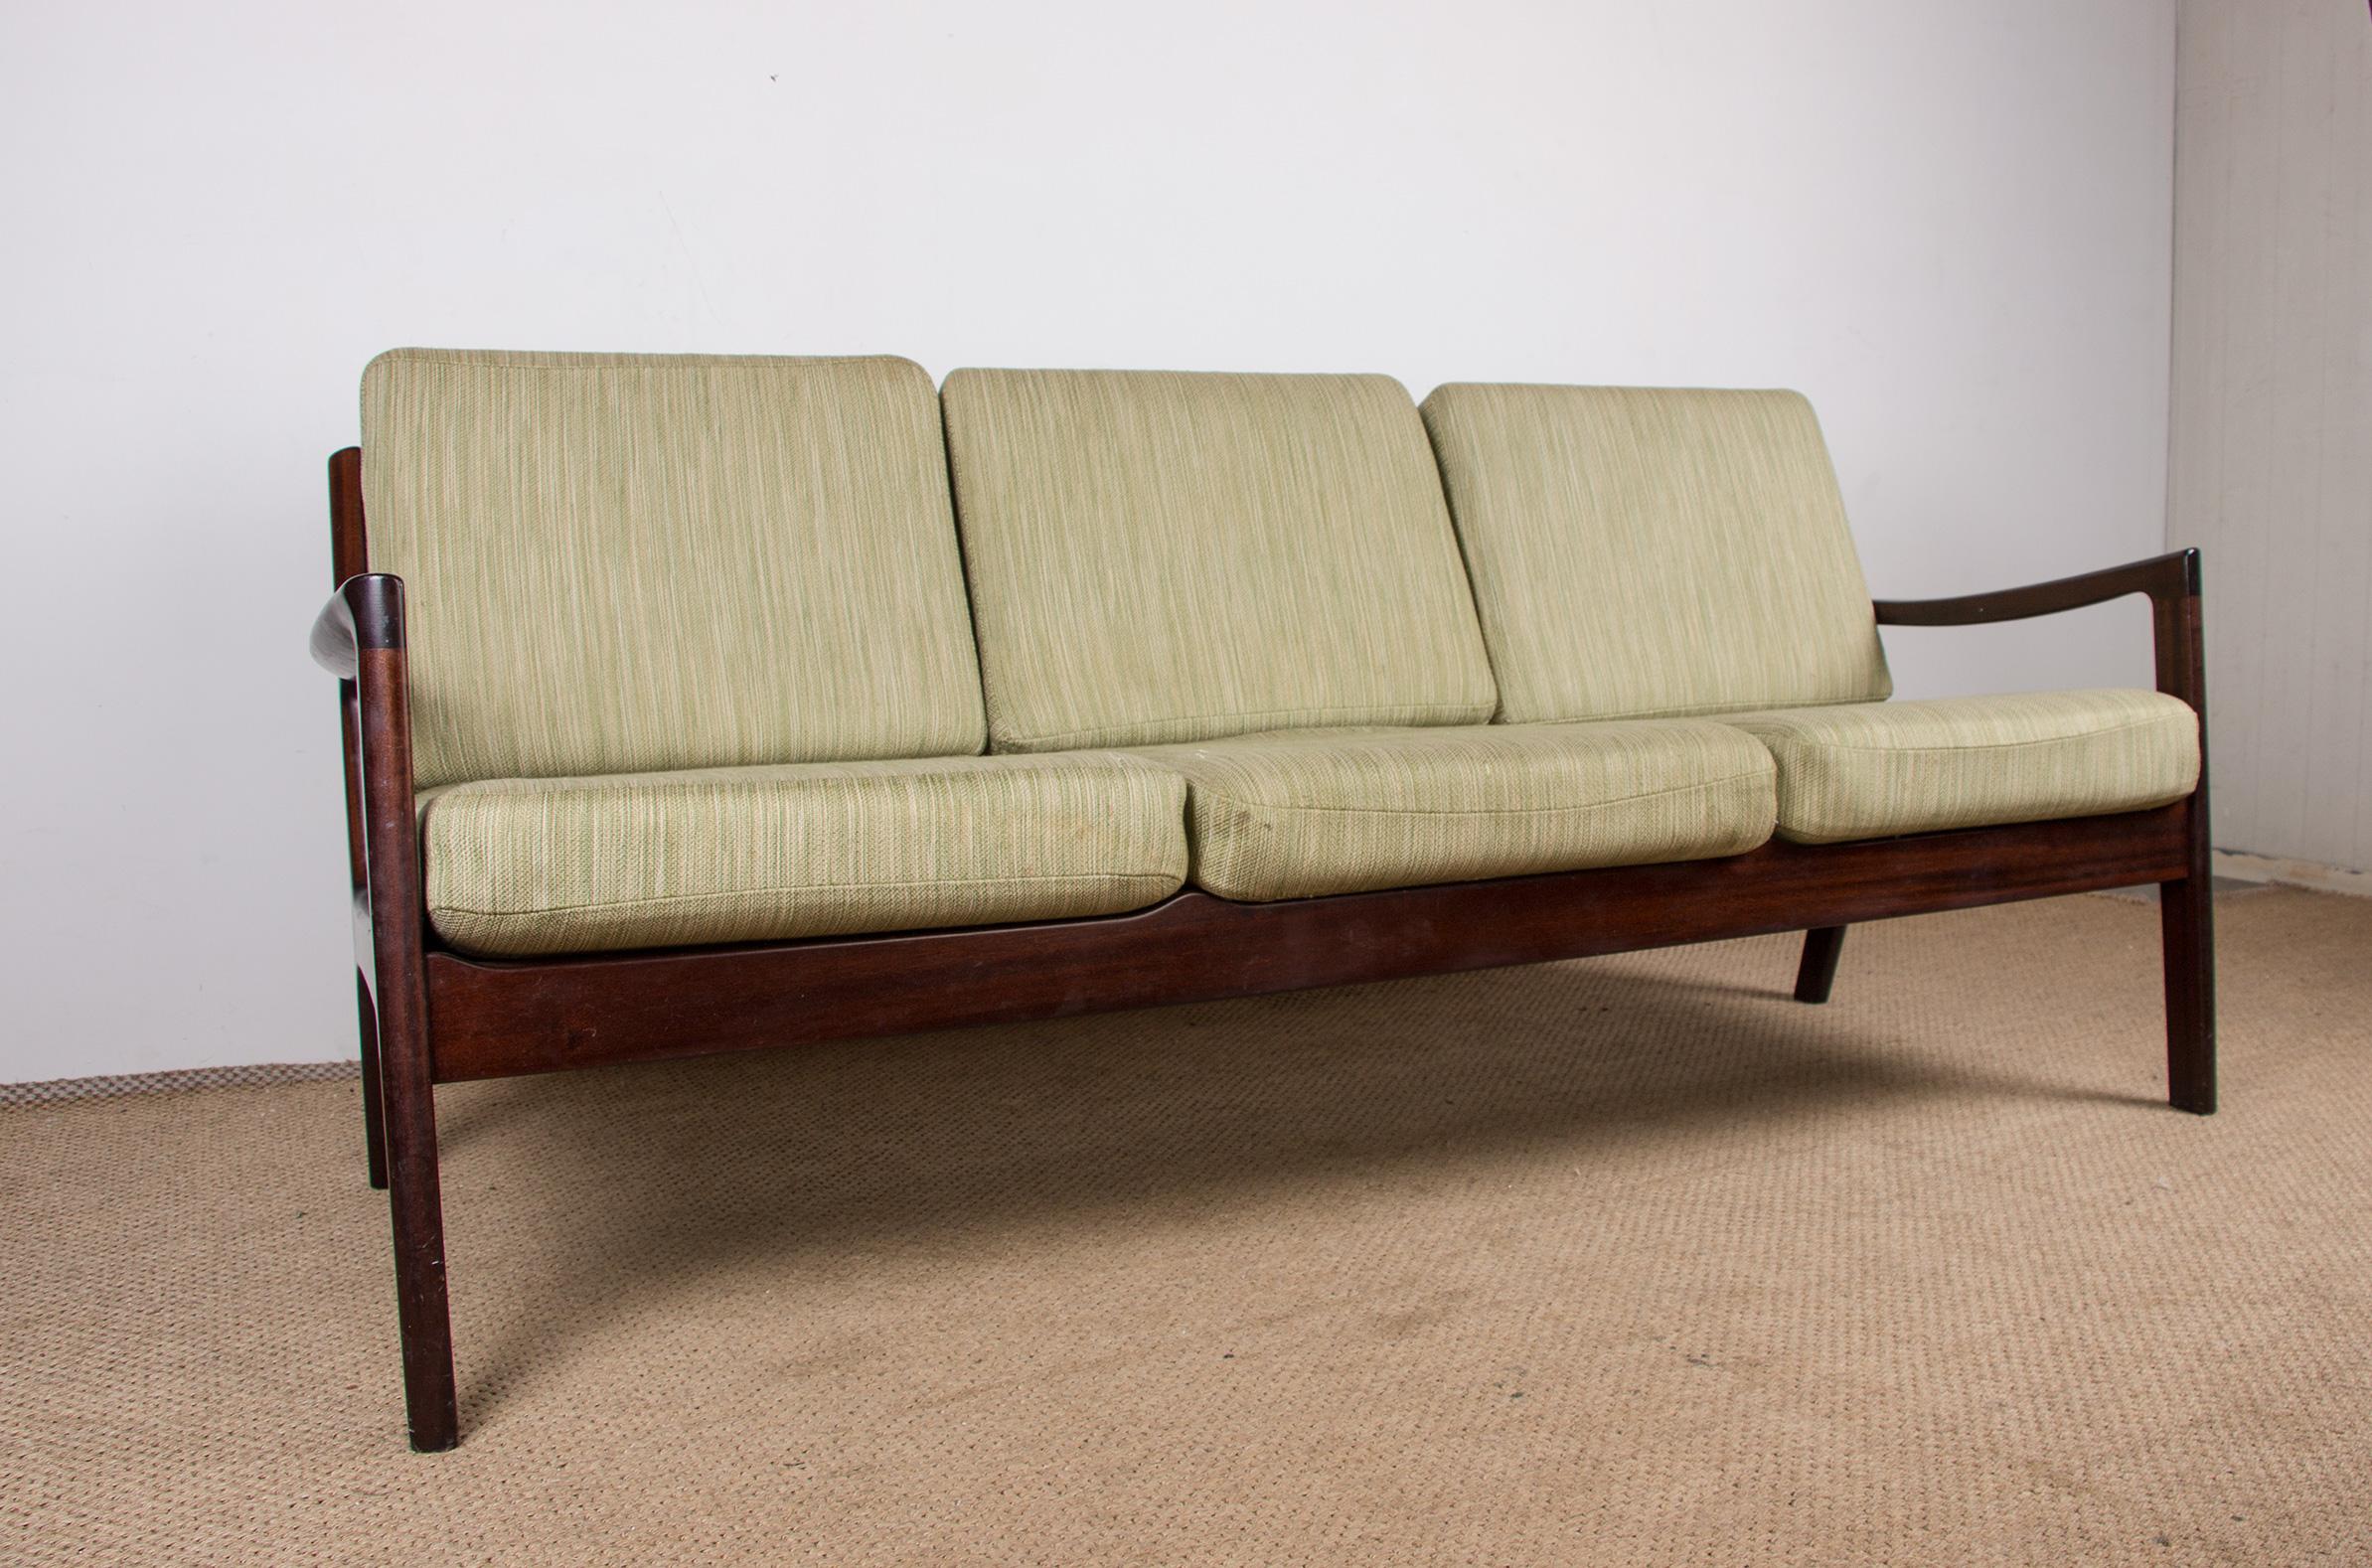 Superb Scandinavian sofa. Structure in solid mahogany, seats and cushions in fabric, very comfortable. Sober and very elegant design. Very good build quality. Furniture listed on the Design Museum Denmark website under number RP 02697.